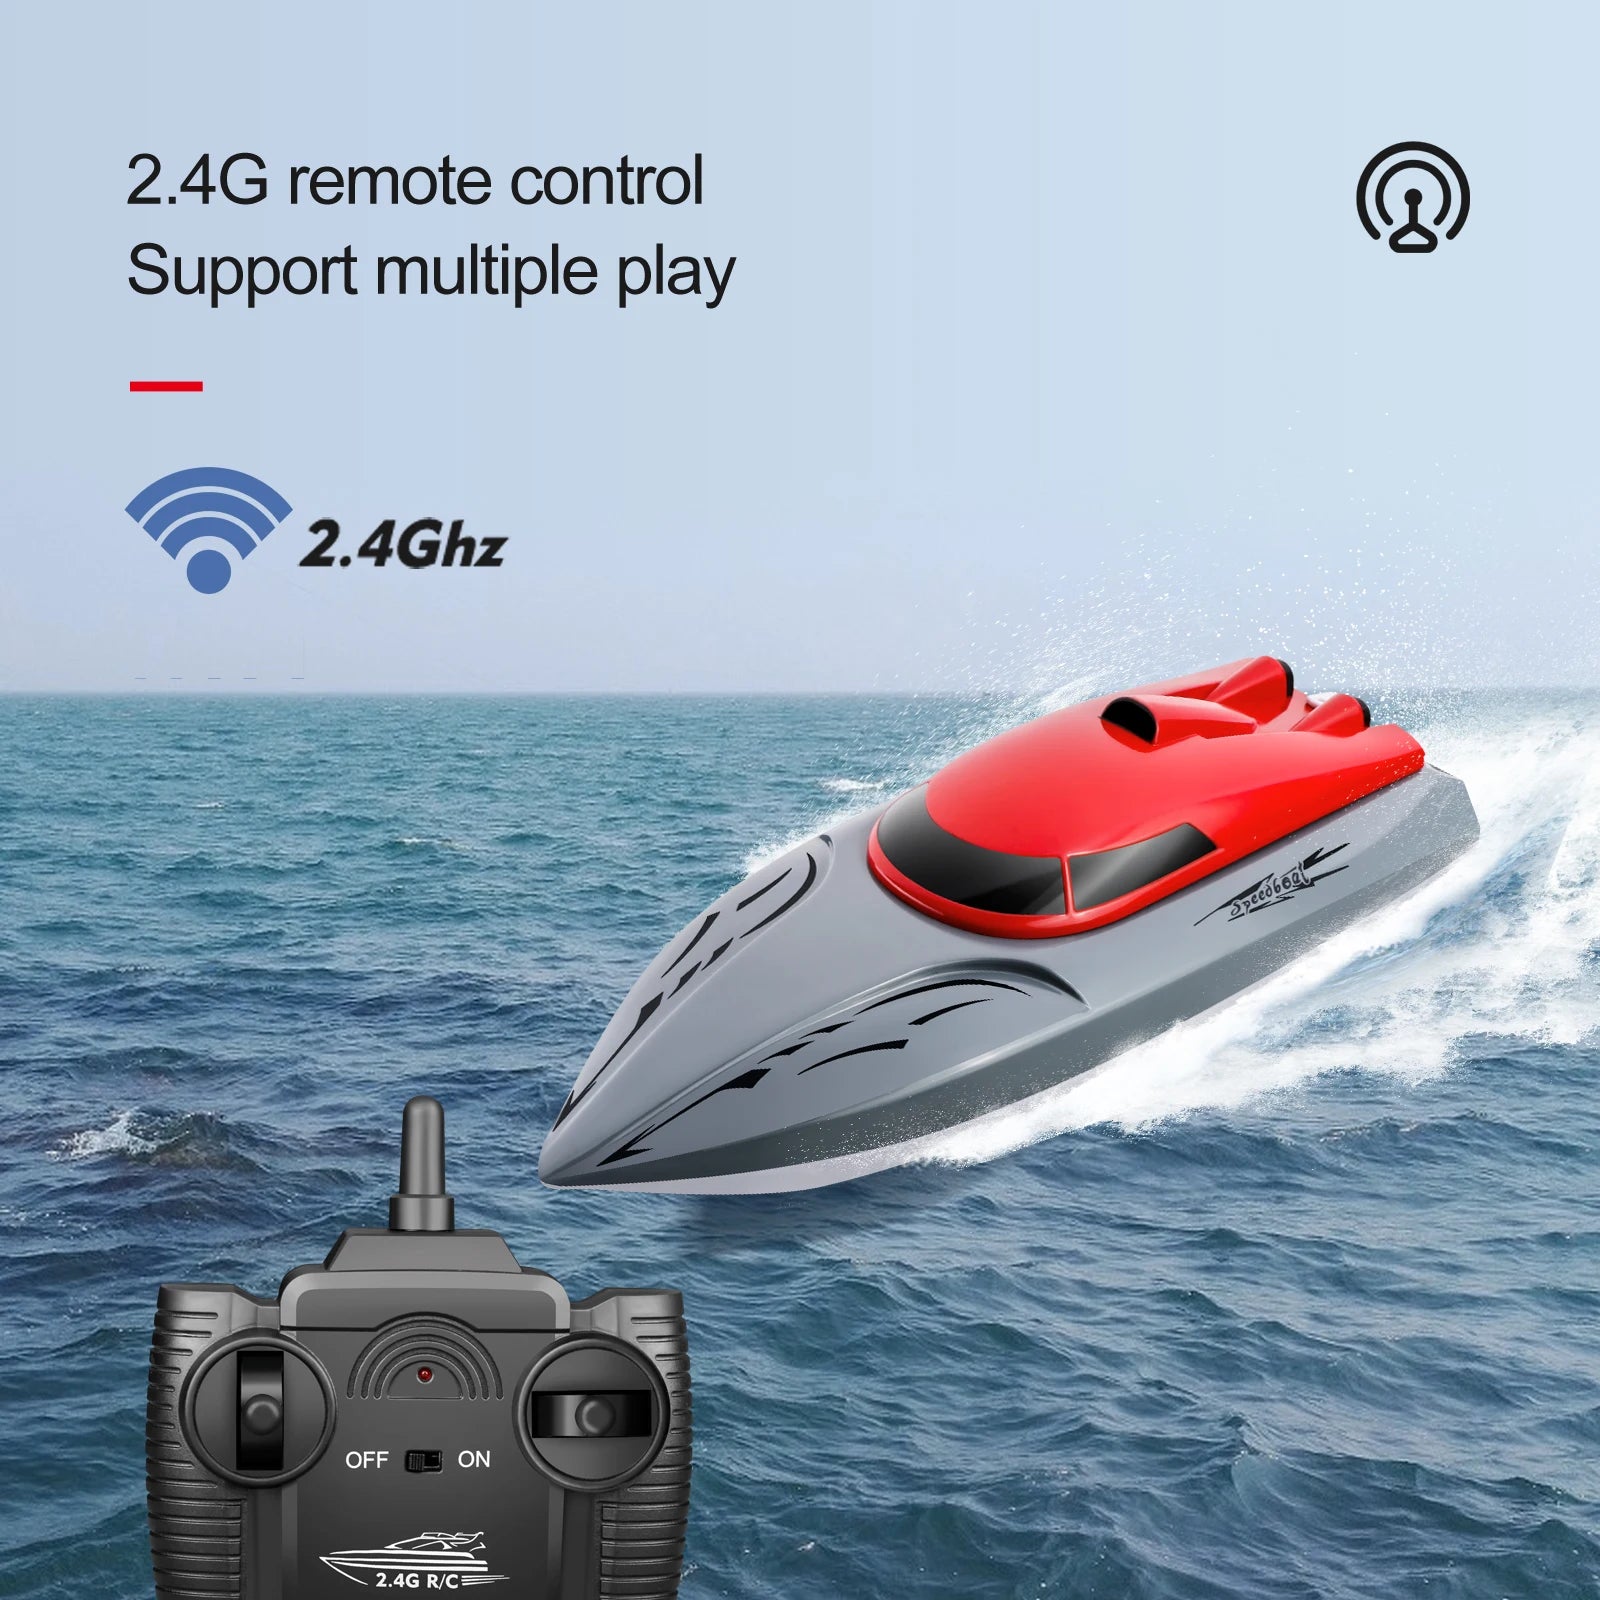 Rc Boat, 2.4G remote control Support multiple play "2.4Ghz OFF ON 2.46 